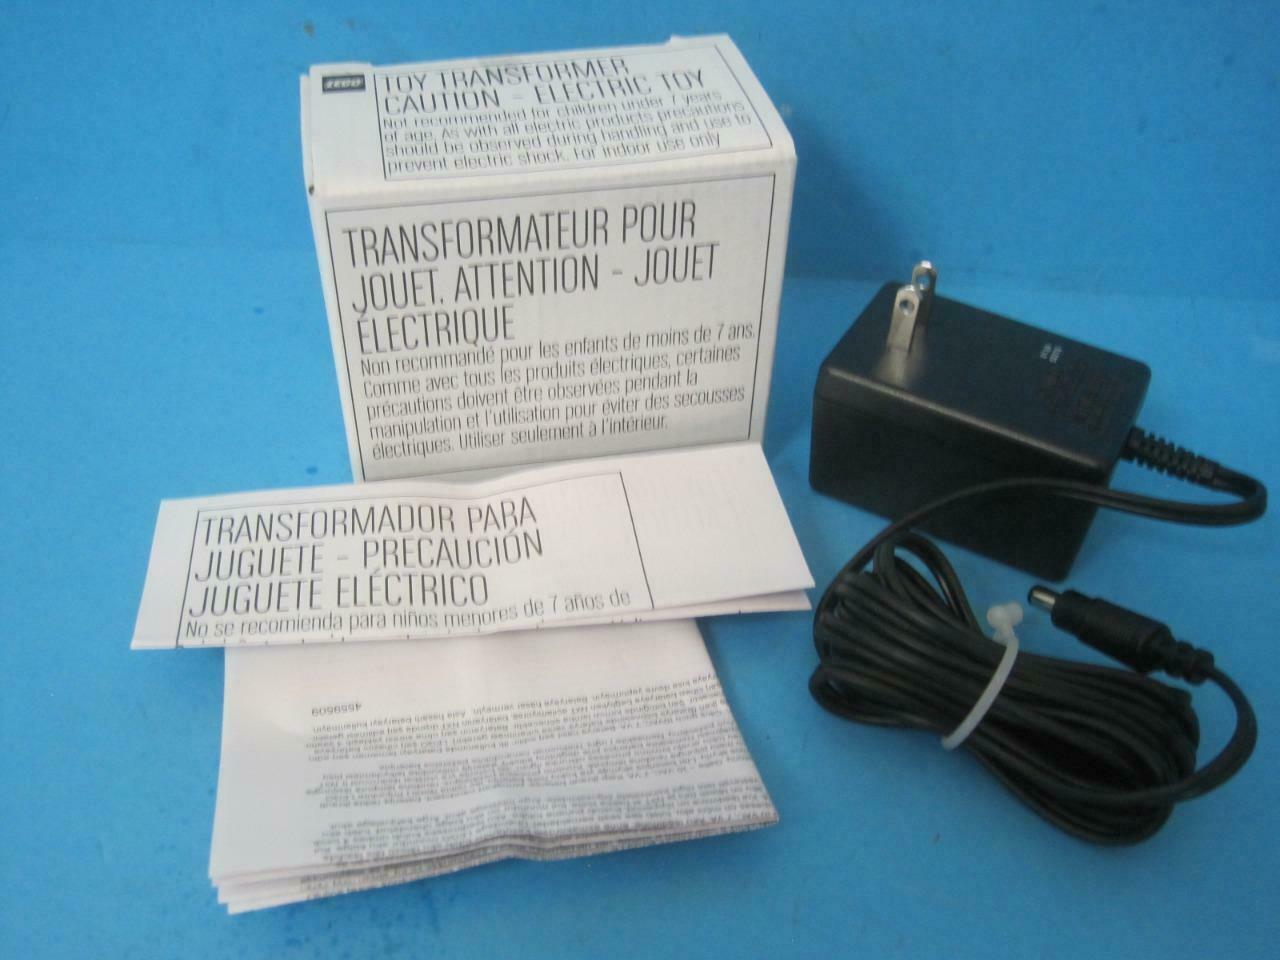 LEGO TOY TRANSFORMER POWER SUPPLY CORD CABLE AC ADAPTER 86716 PI-41-824US 10V Brand: LEGO Type: AC/AC Adapter MPN